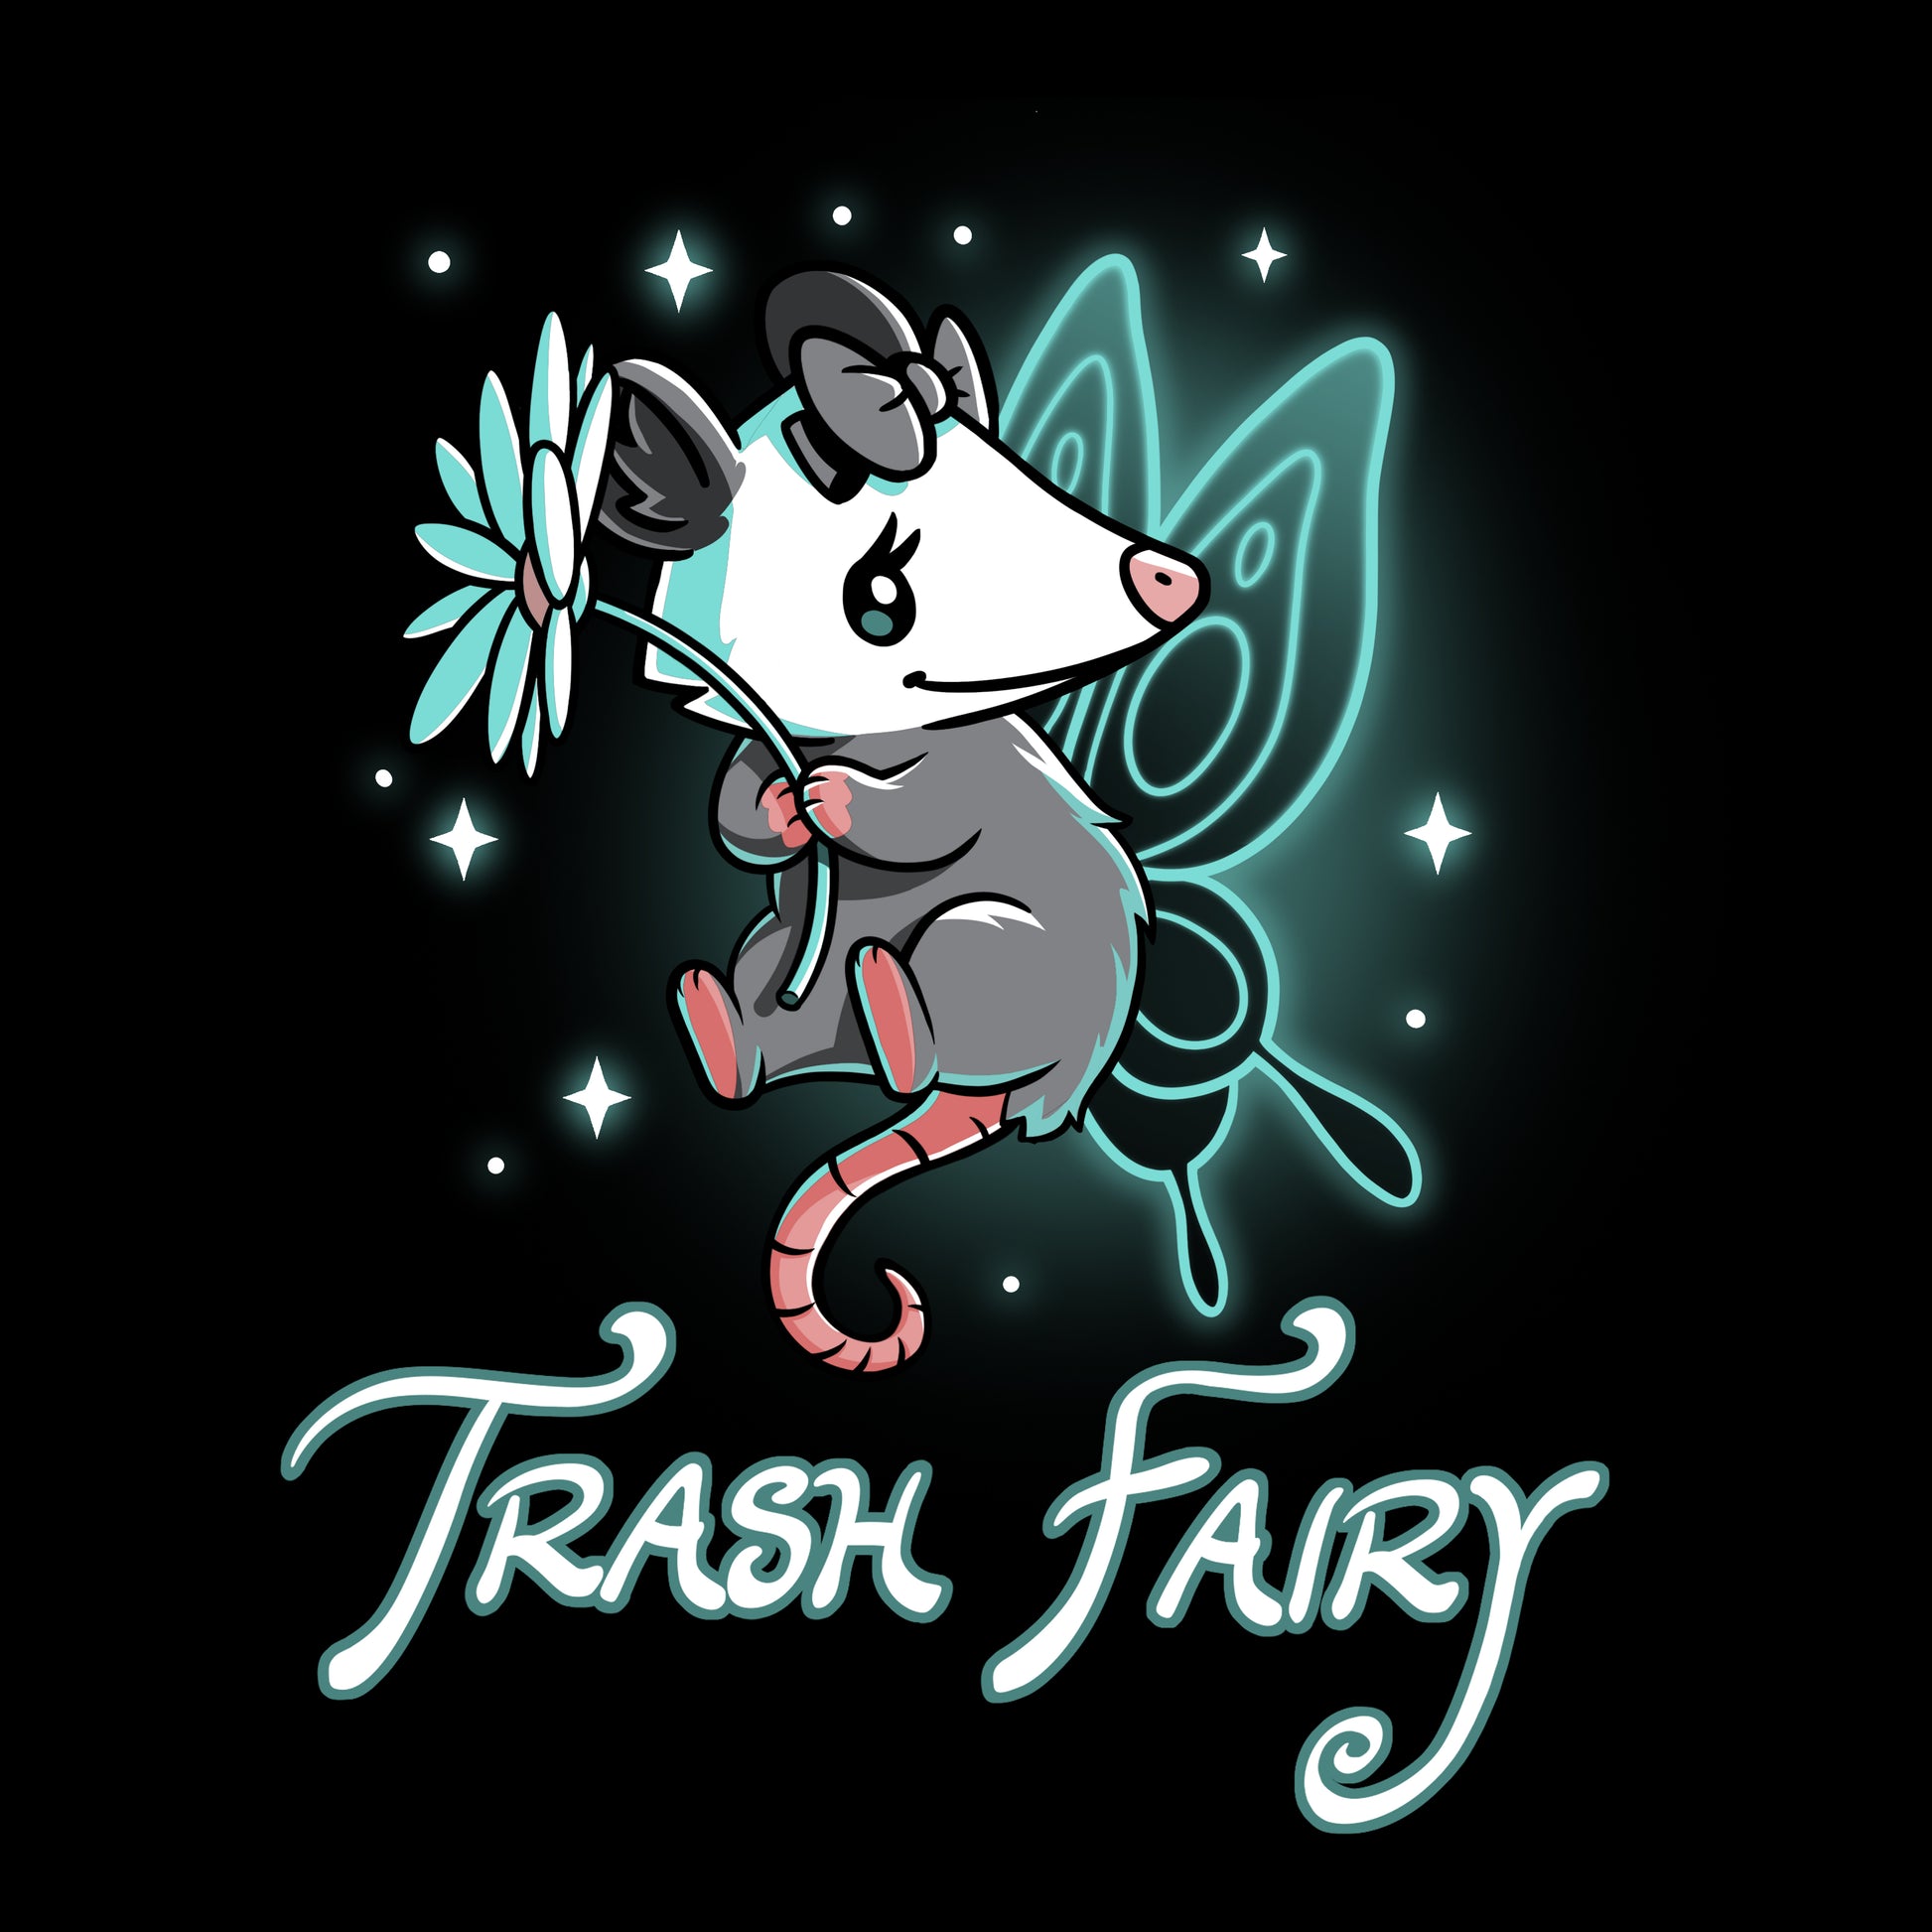 The TeeTurtle Trash Fairy black t-shirt features the iconic trash fairy logo with an opossum holding a flower.